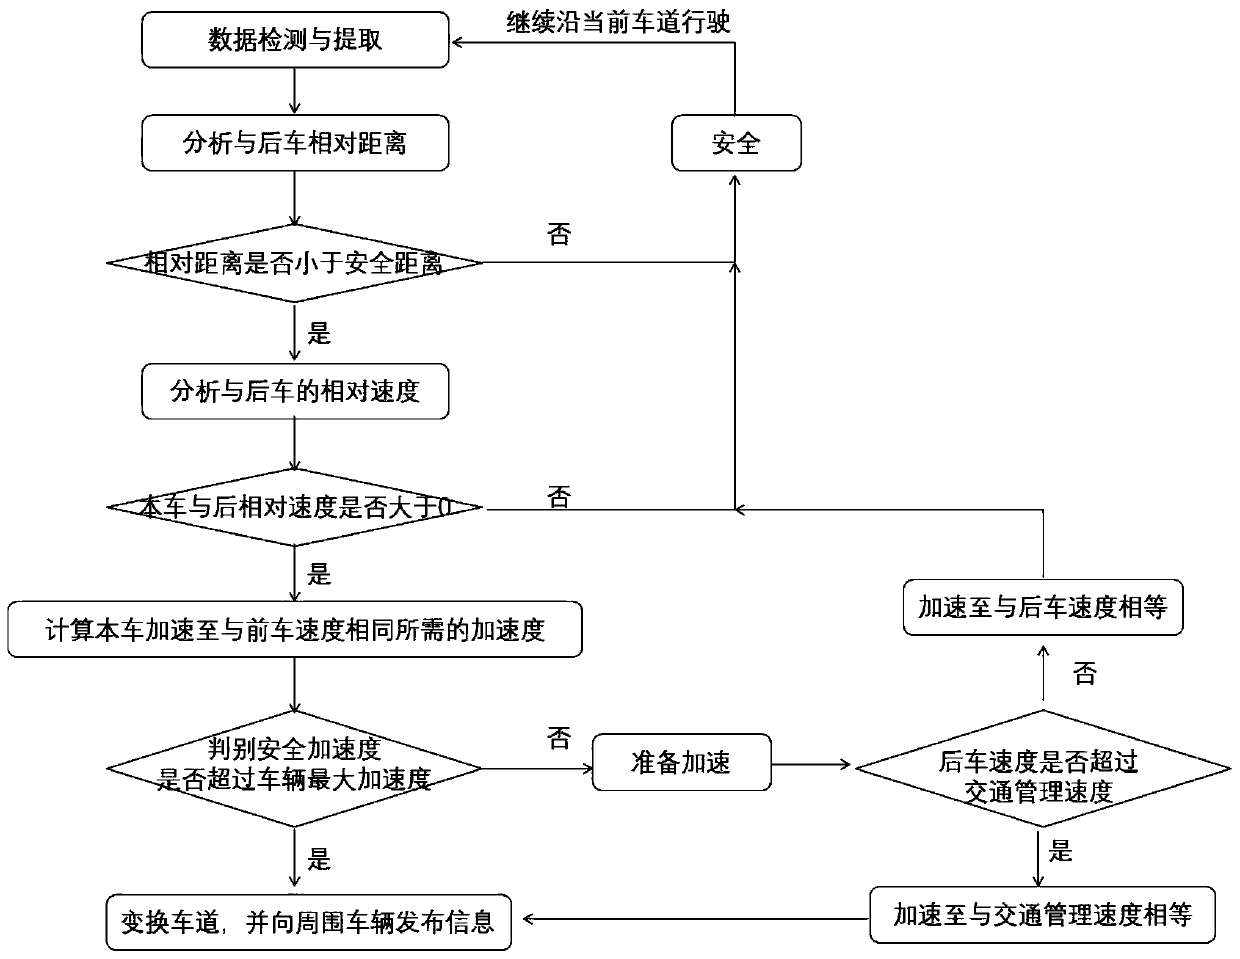 A safety judgment and processing method in the driving process of an intelligent network-connected automatic driving automobile